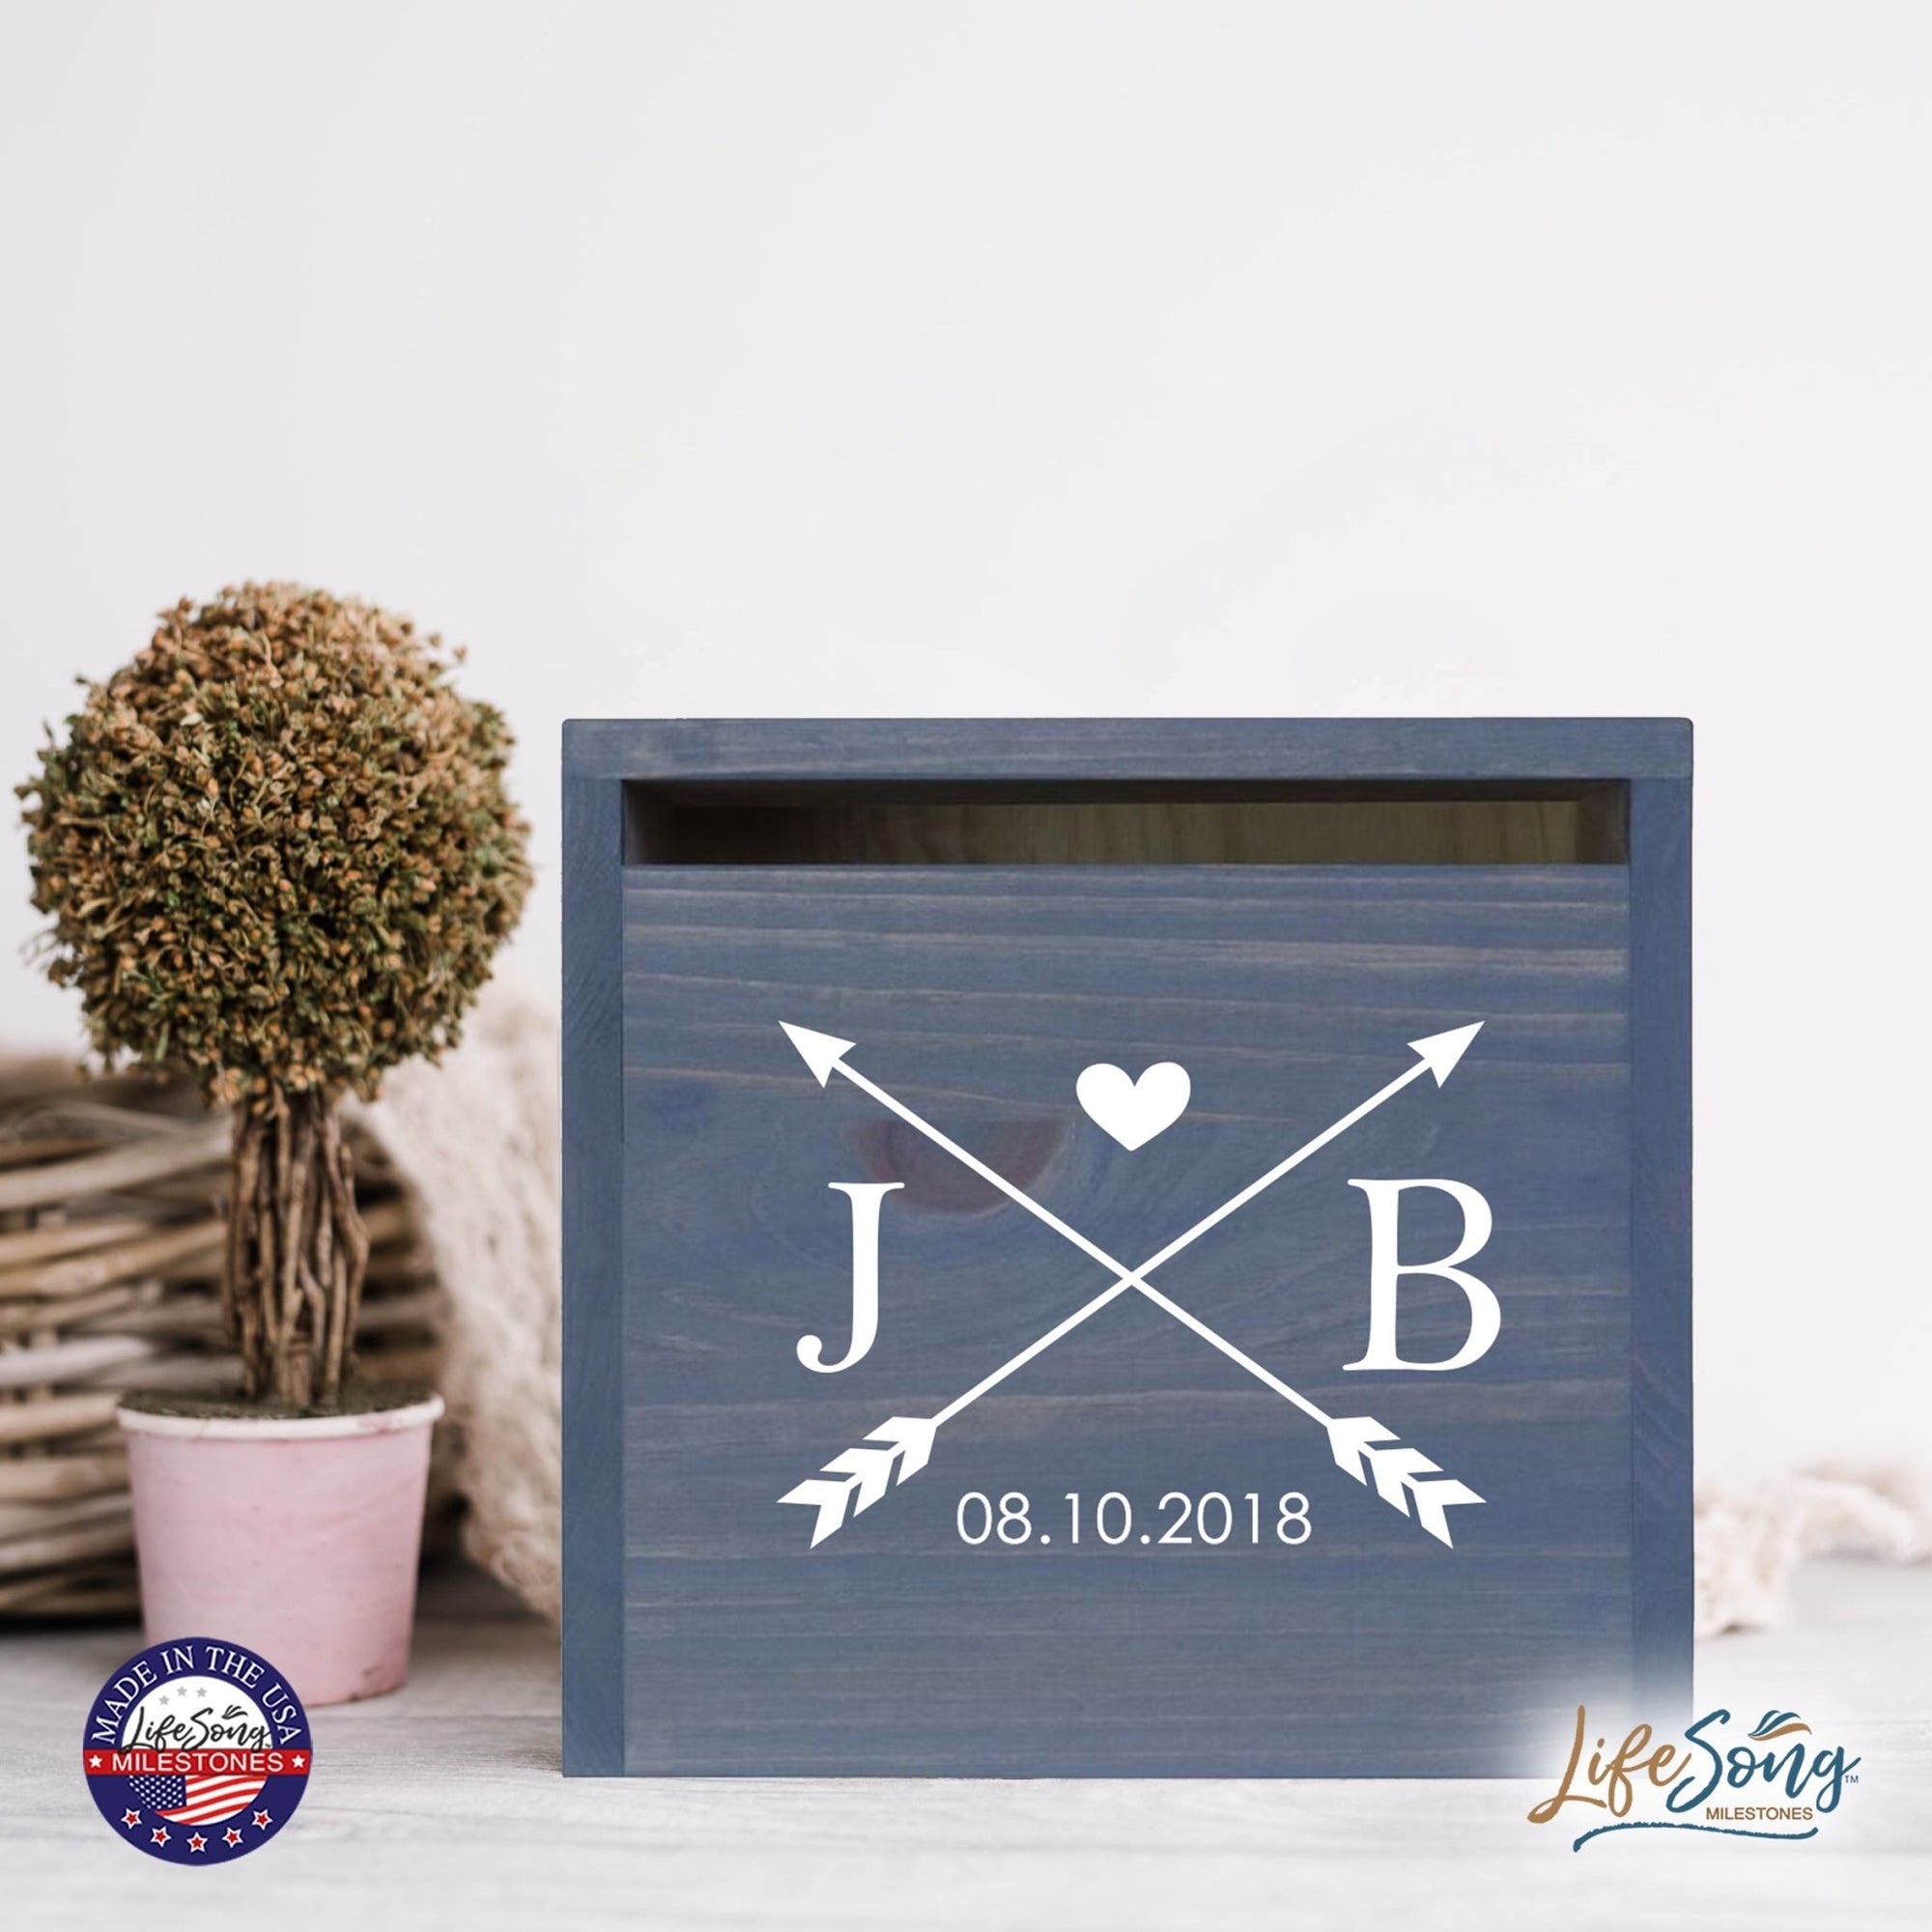 Personalized Wooden Card Box for Wedding Ceremonies, Venues, Receptions, Bridal Showers, and Engagement Parties 13.5x12 - J&B (Arrows) - LifeSong Milestones